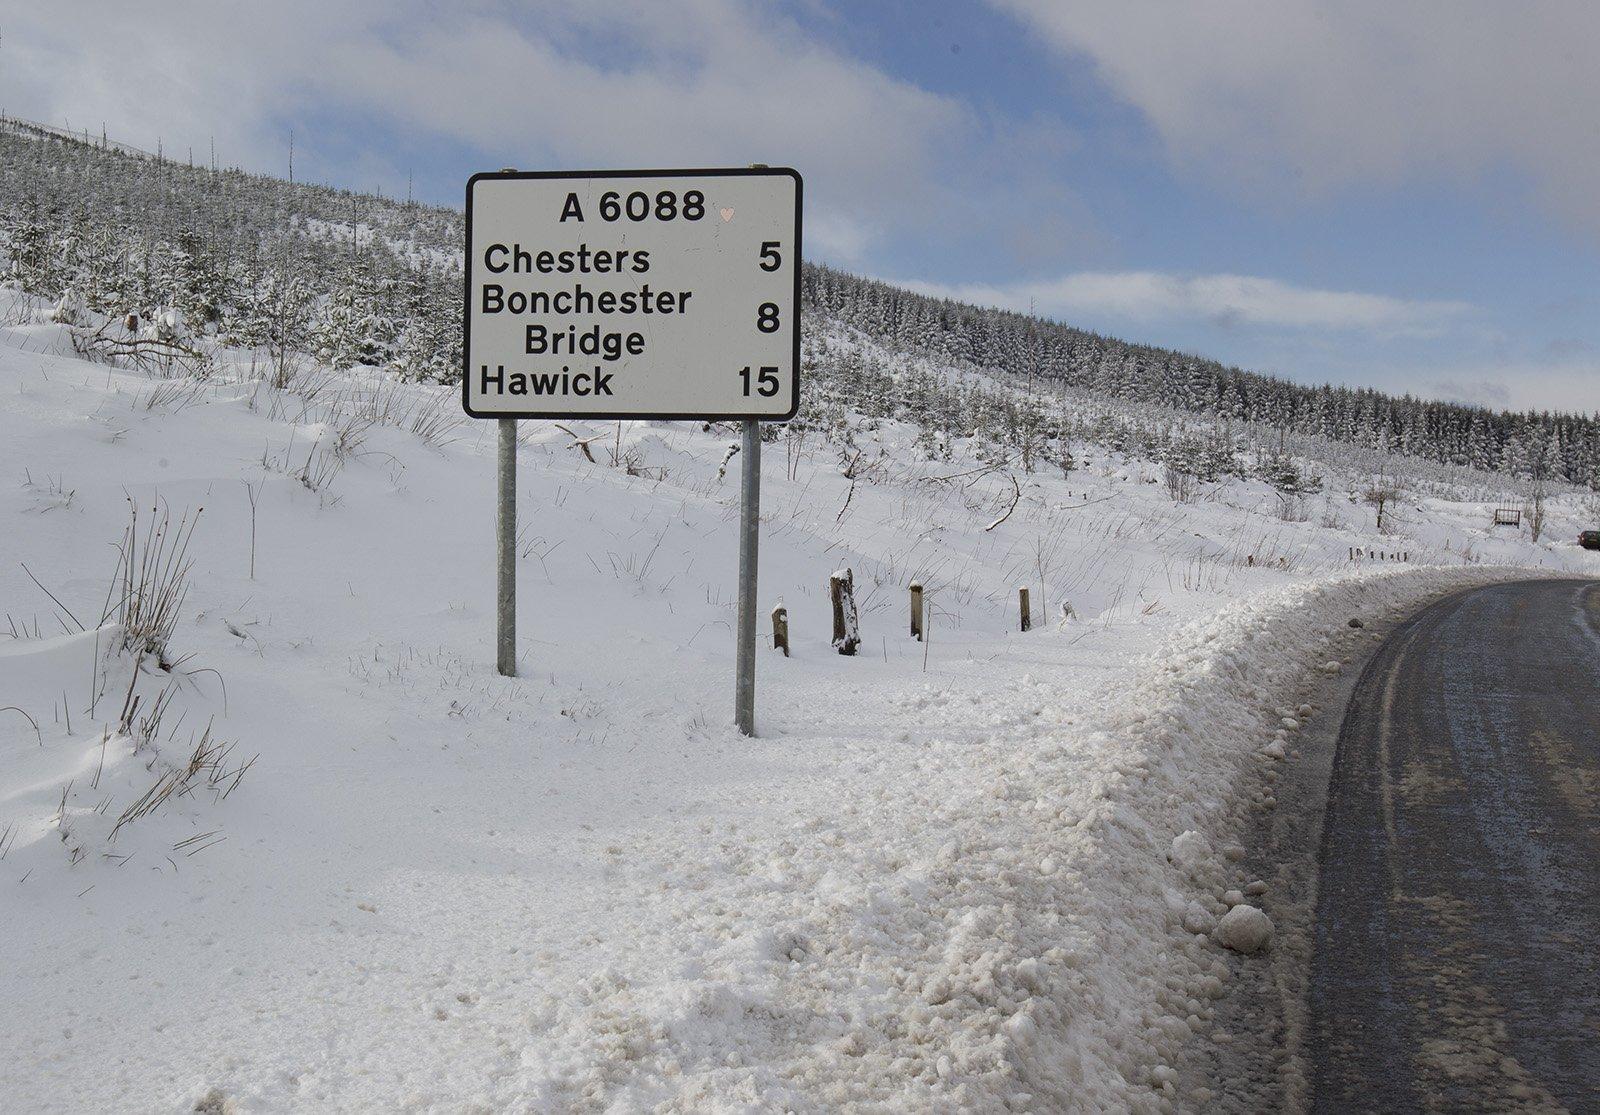 Snow at the A6088 turn-off from the A68 at Carter Bar.